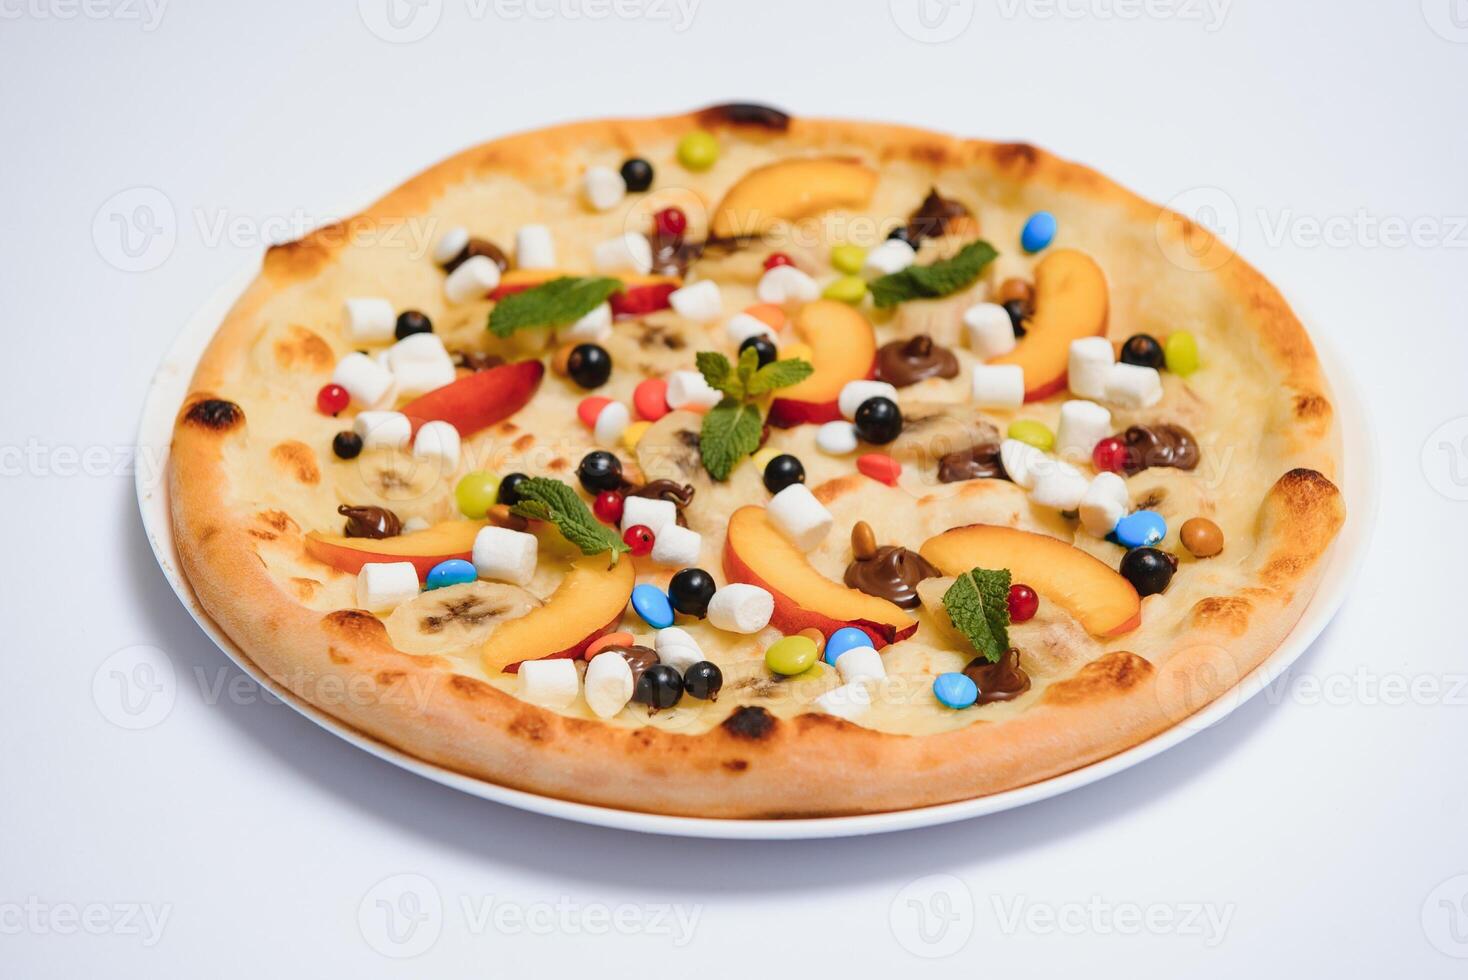 Sweet pizza with marshmallow sauce and colored sweets, chocolate pizza with colored sweets and chocolate pizza with banana on a white background photo